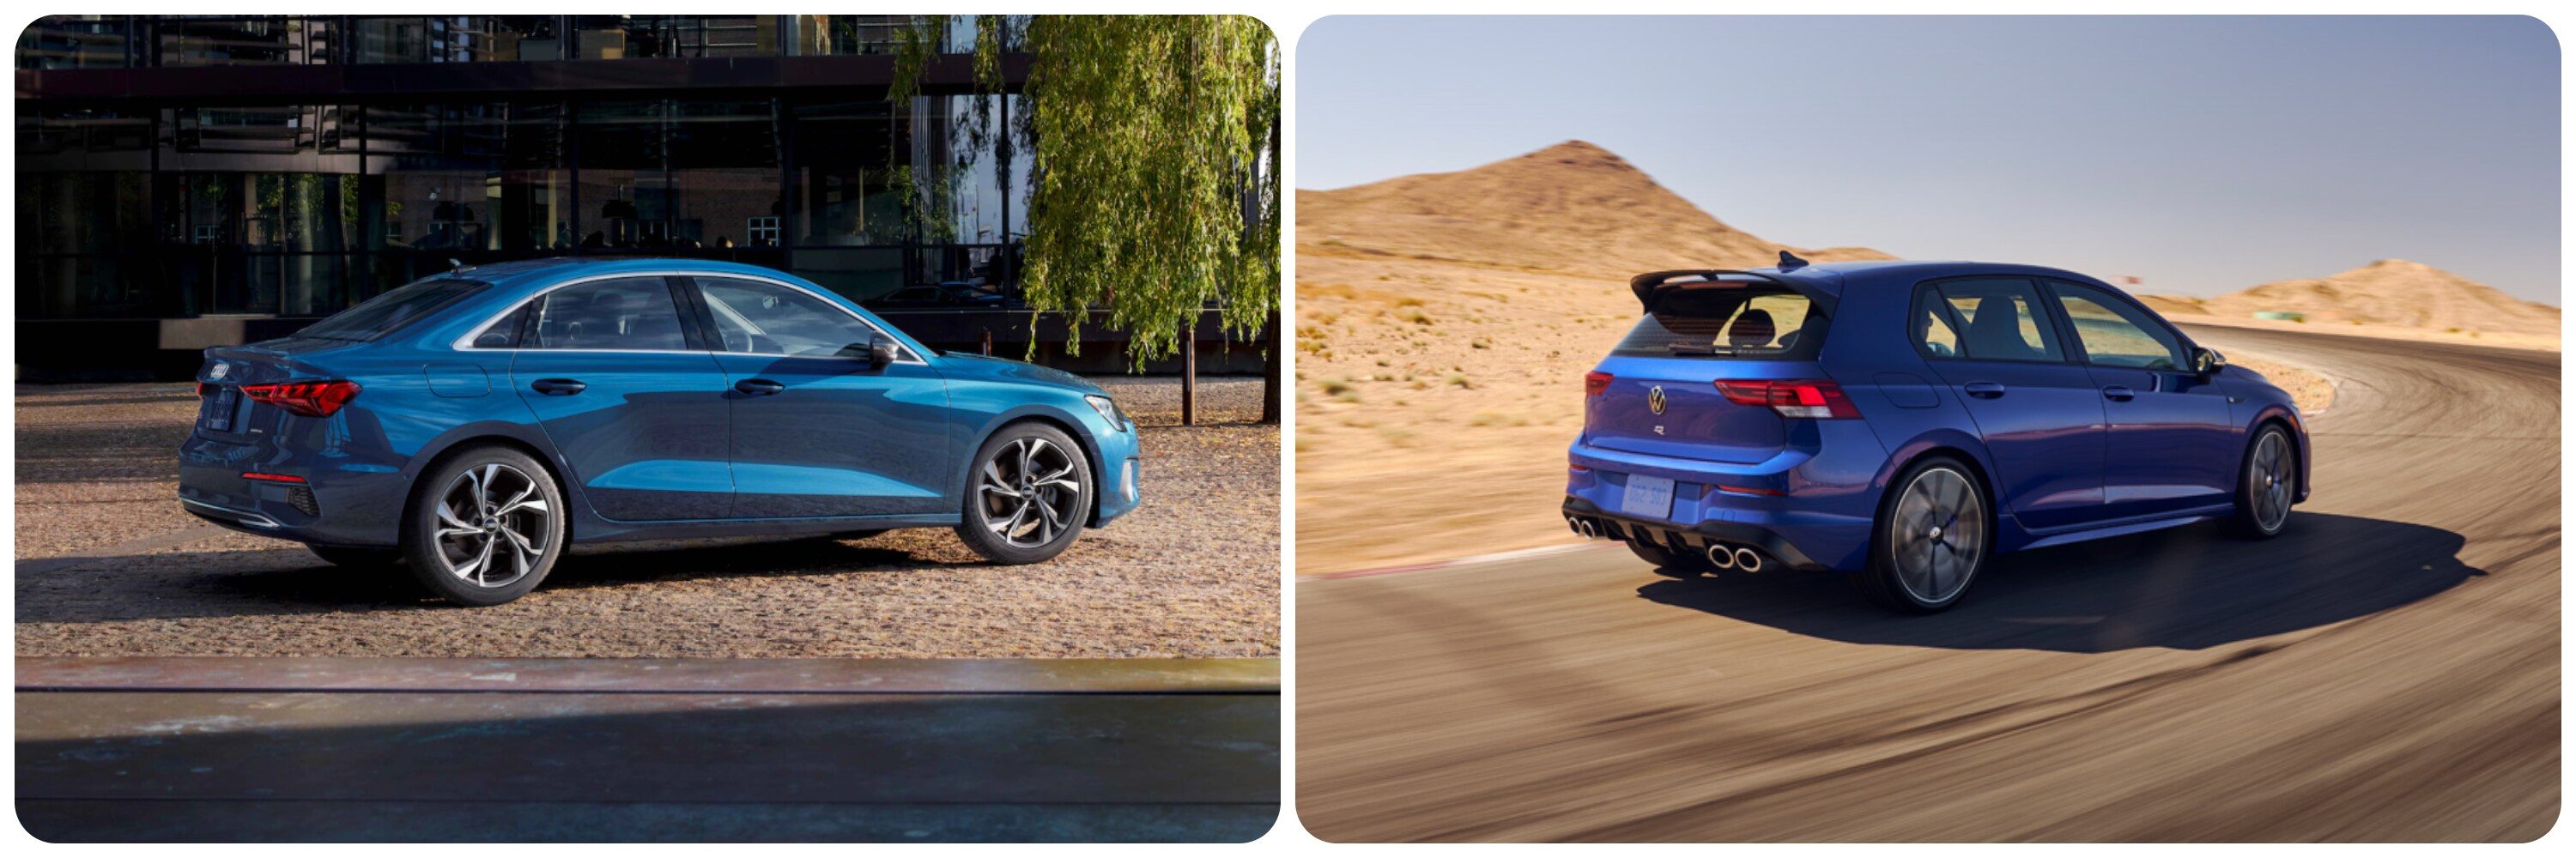 On the left an angled profile view of a bright blue 2022 Audi A3 as it sits parked in front of a house showing off the profile and rear of the vehicle. On the right an indigo blue 2022 Volkswagen Golf-R takes a curve in the road in a desert, showing off the profile and hatchback of the car as it drives by.